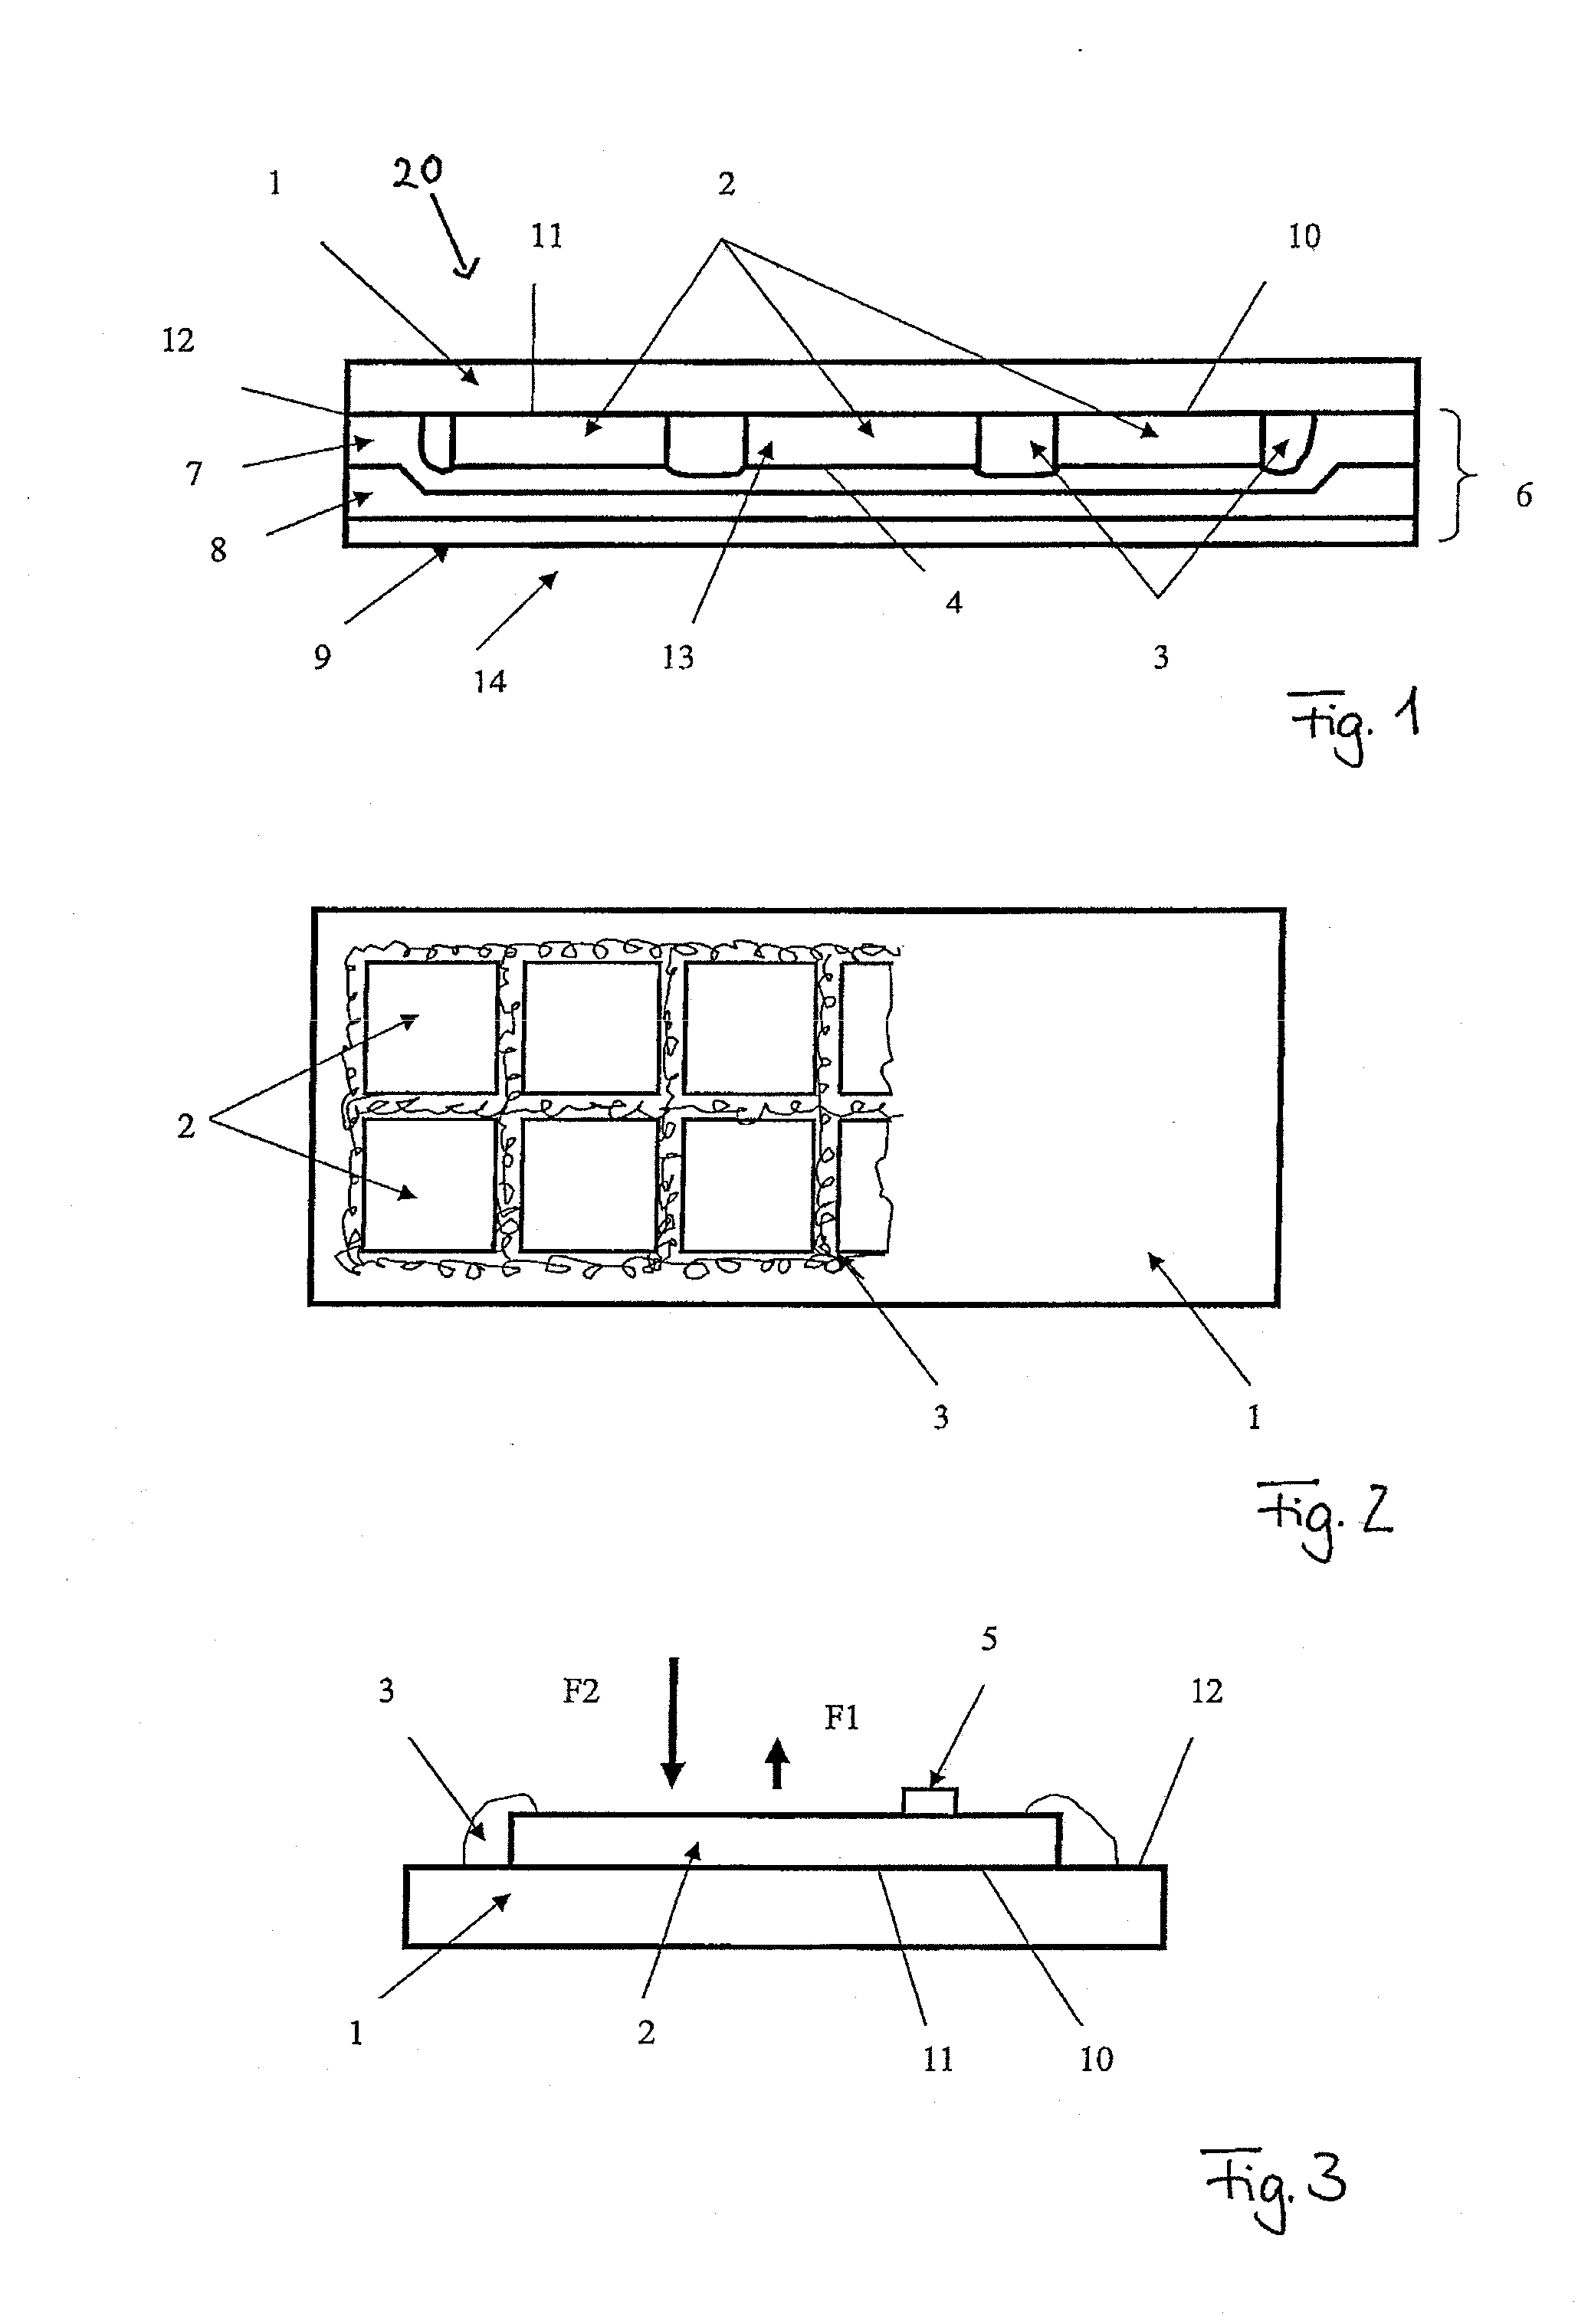 Photovoltaic module with at least one crystalline solar cell